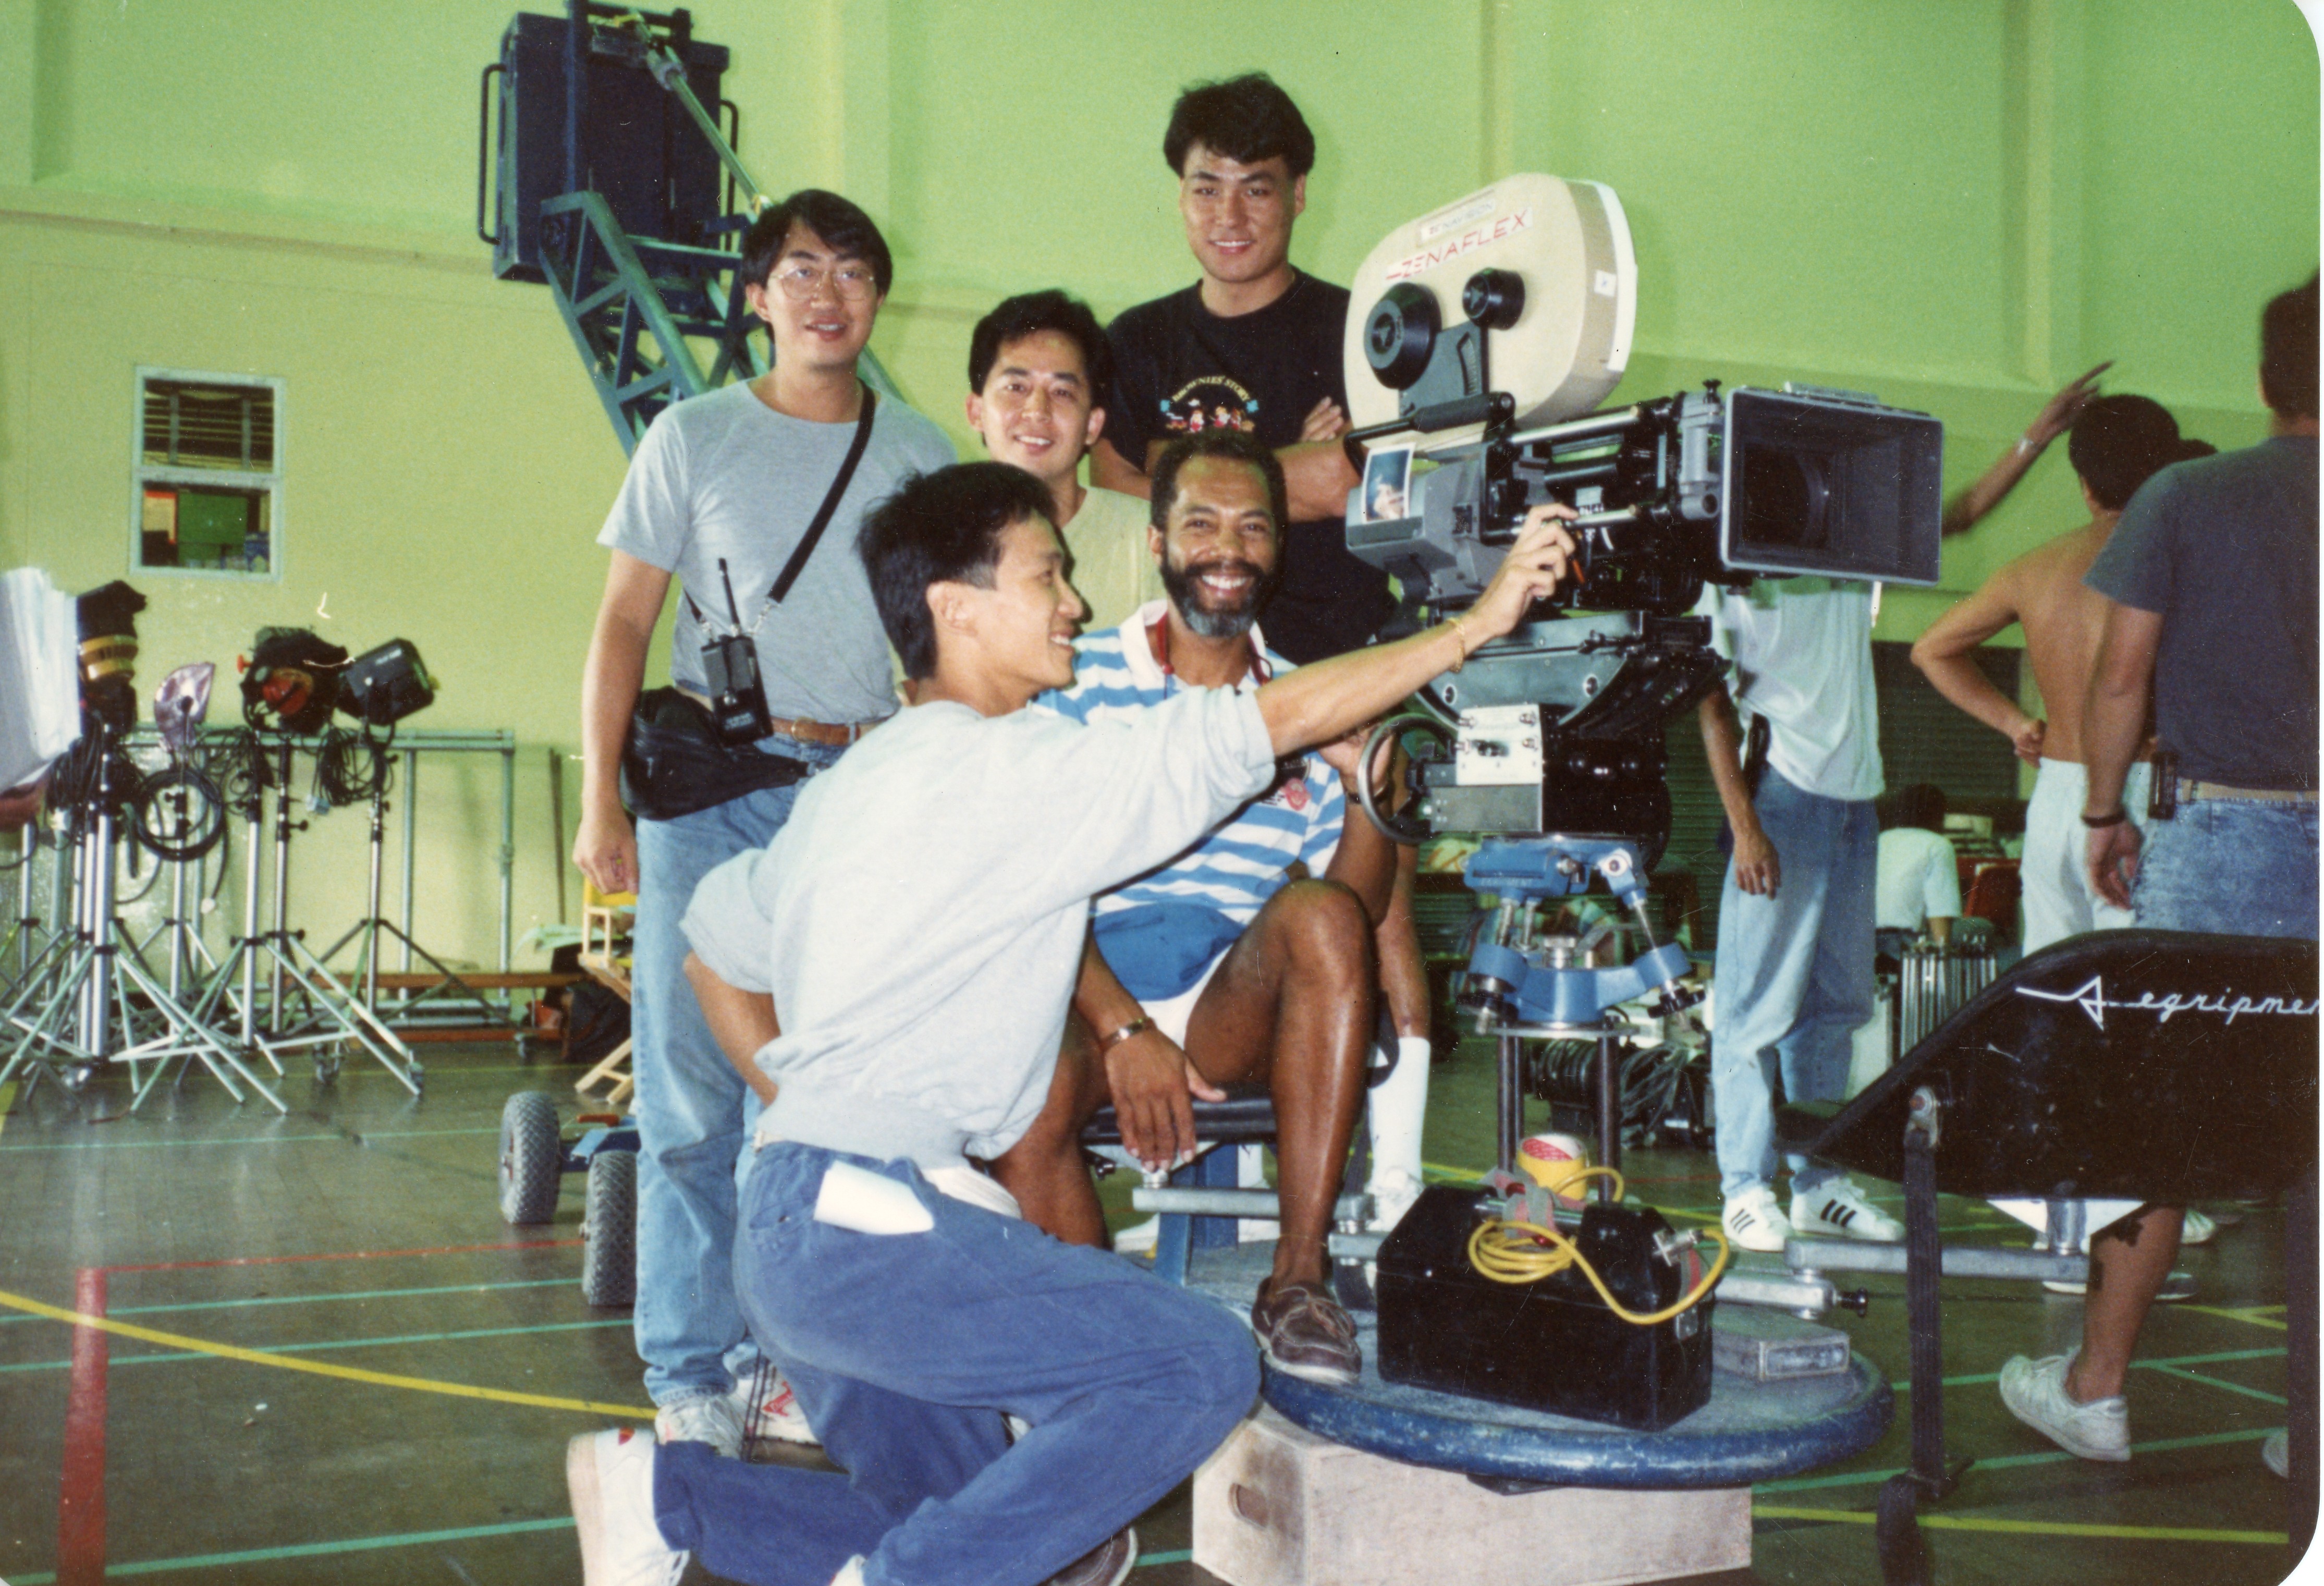 Haskell and 'KICKBOXER' crew on location at Fort Stanley in Hong Kong